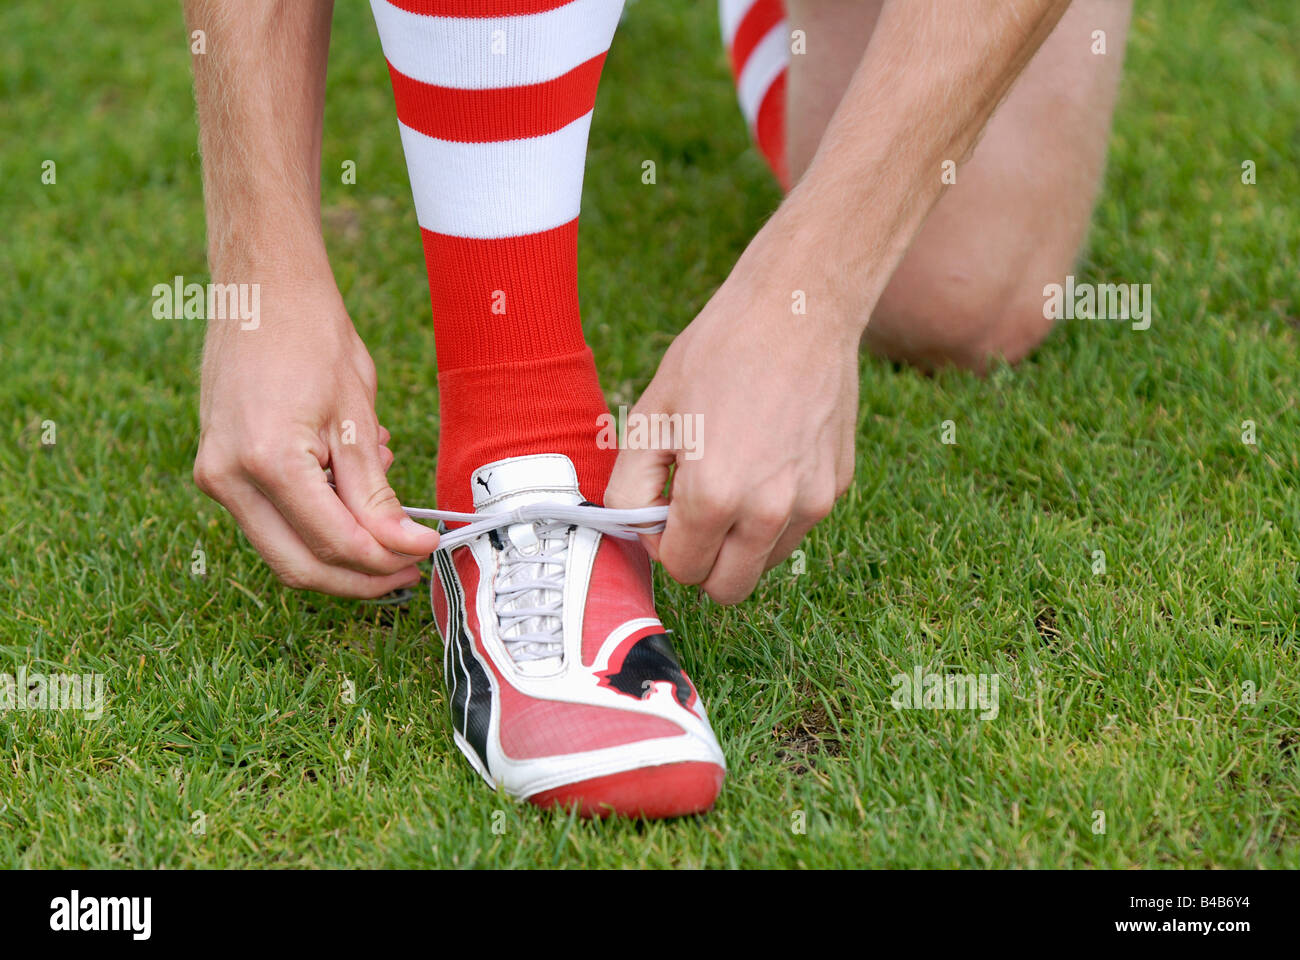 Soccerplayer laces up his red and white Puma soccershoes Stock Photo